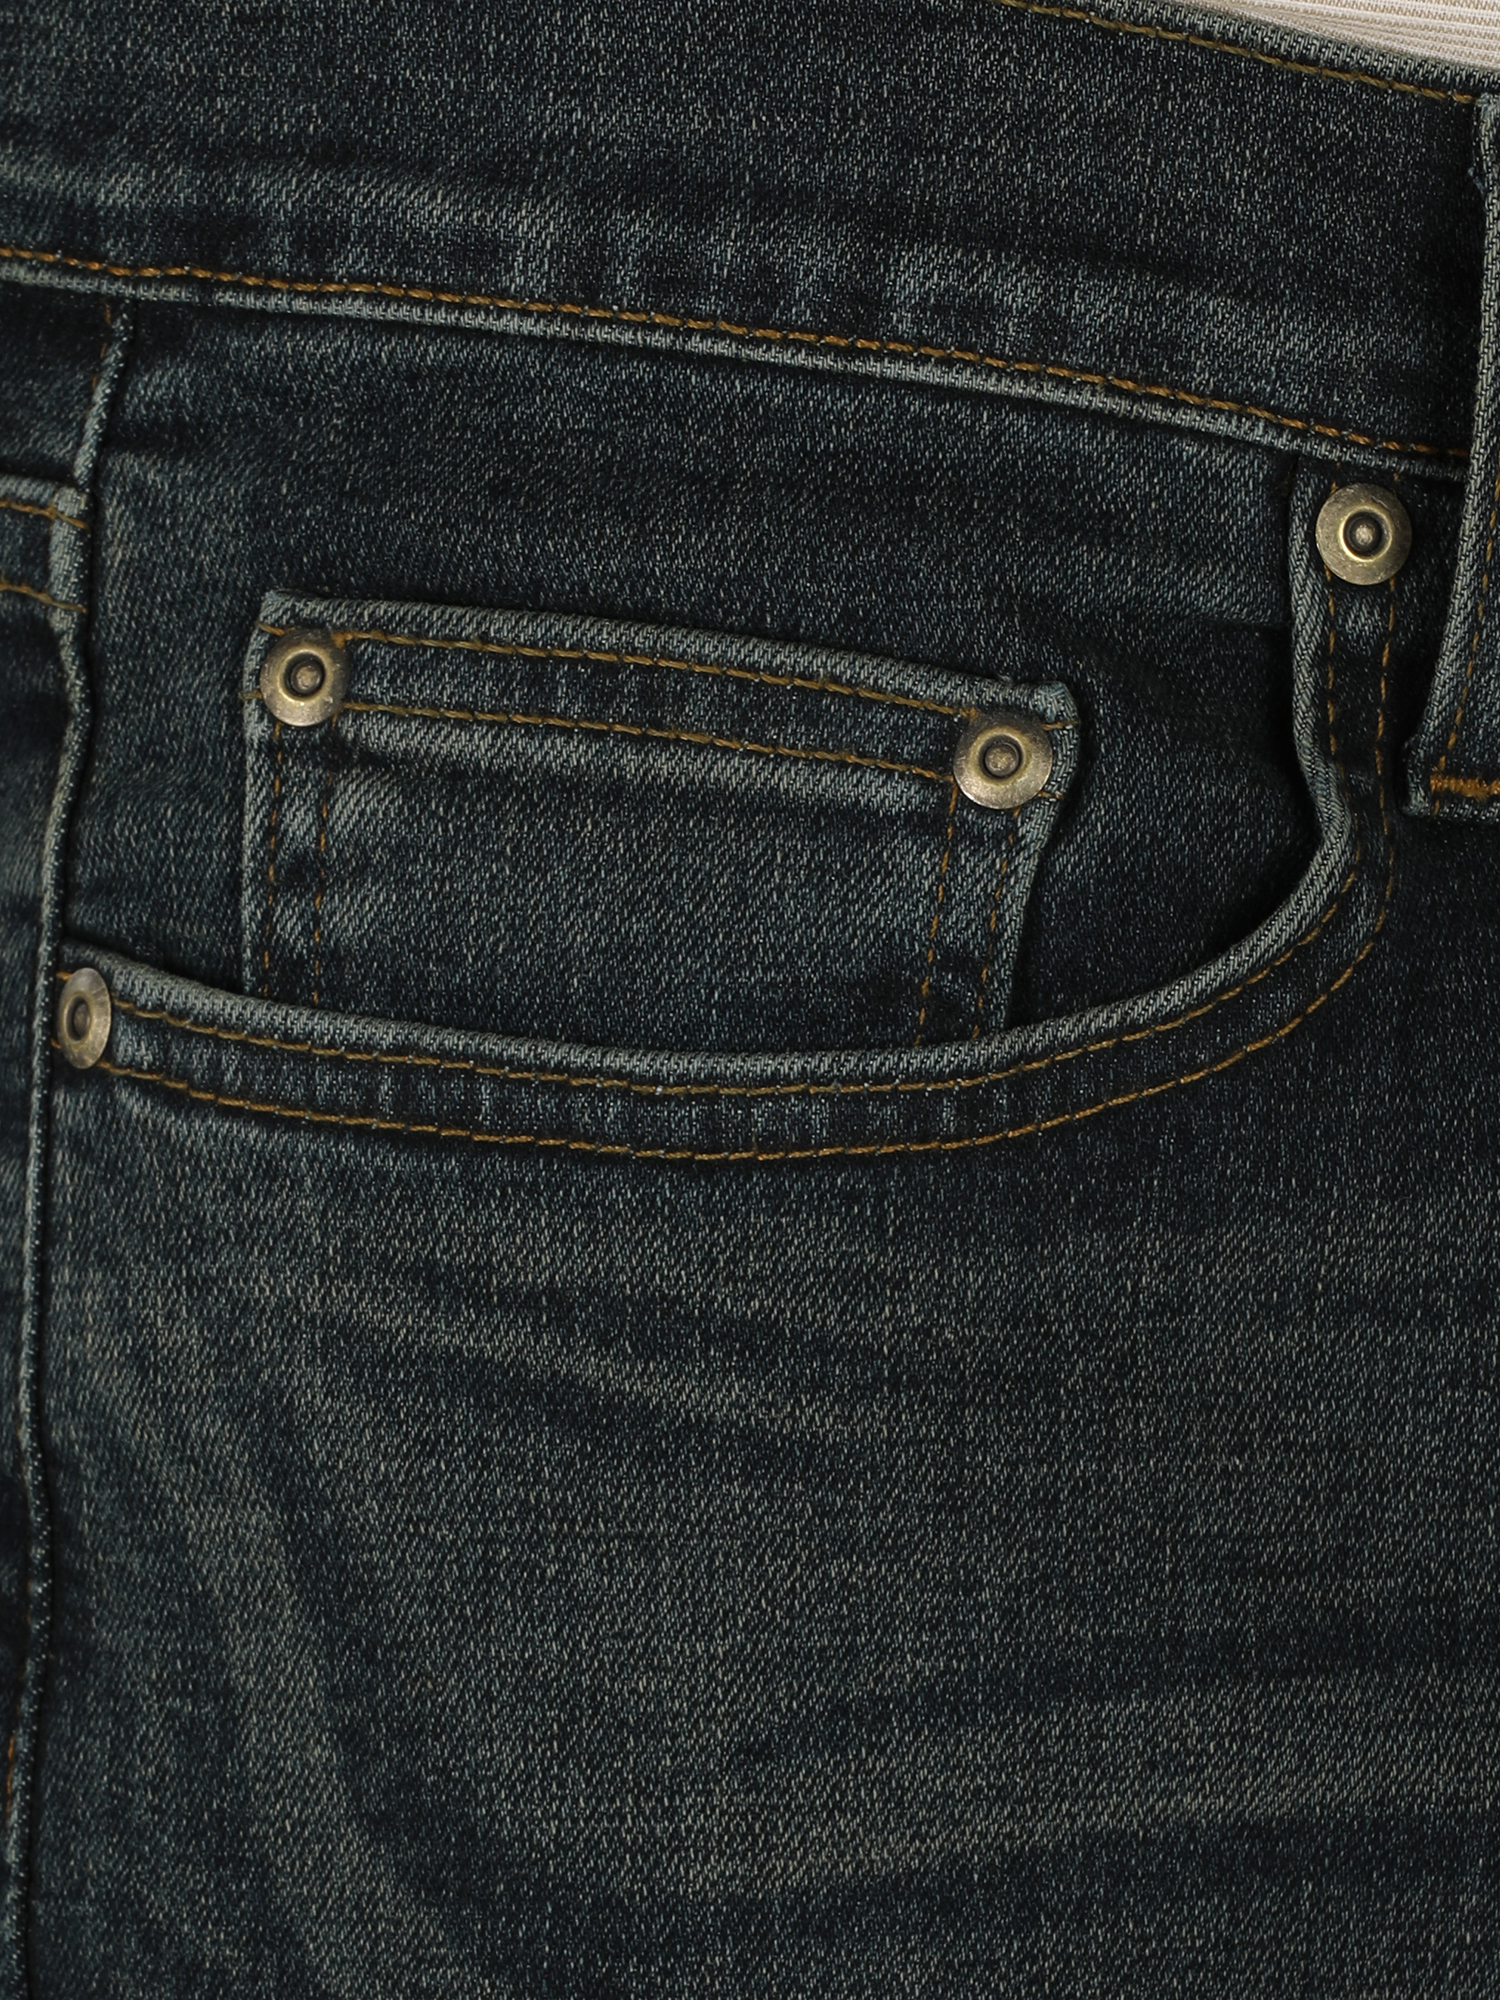 George Men's Bootcut Jeans - image 4 of 6